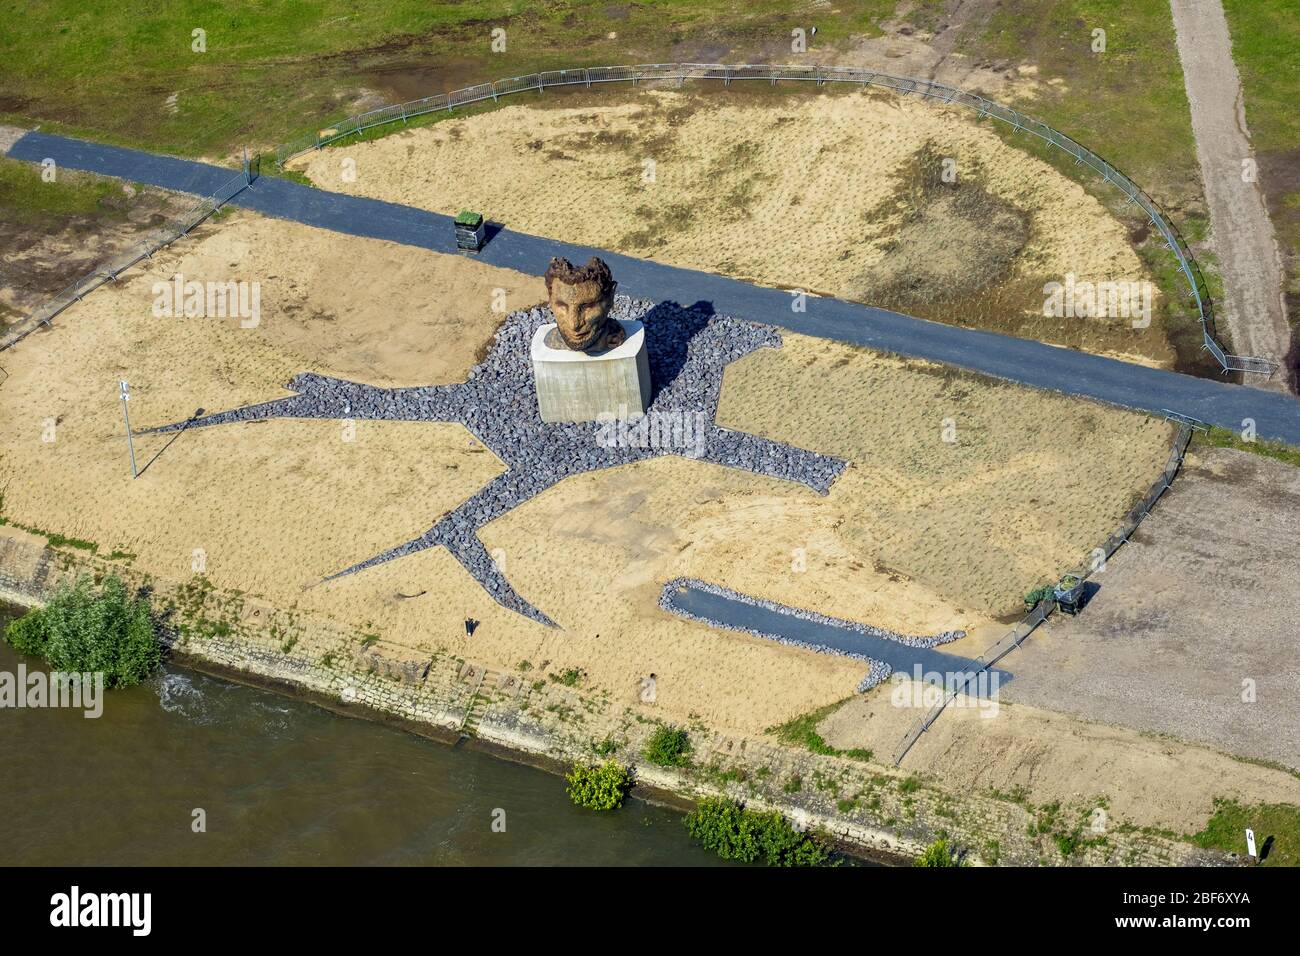 , tourist attraction of a large sculpture of Poseidon on the Ruhrorter Mercator island in Duisburg-Ruhrort, 09.06.2016, aerial view, Germany, North Rhine-Westphalia, Ruhr Area, Duisburg Stock Photo